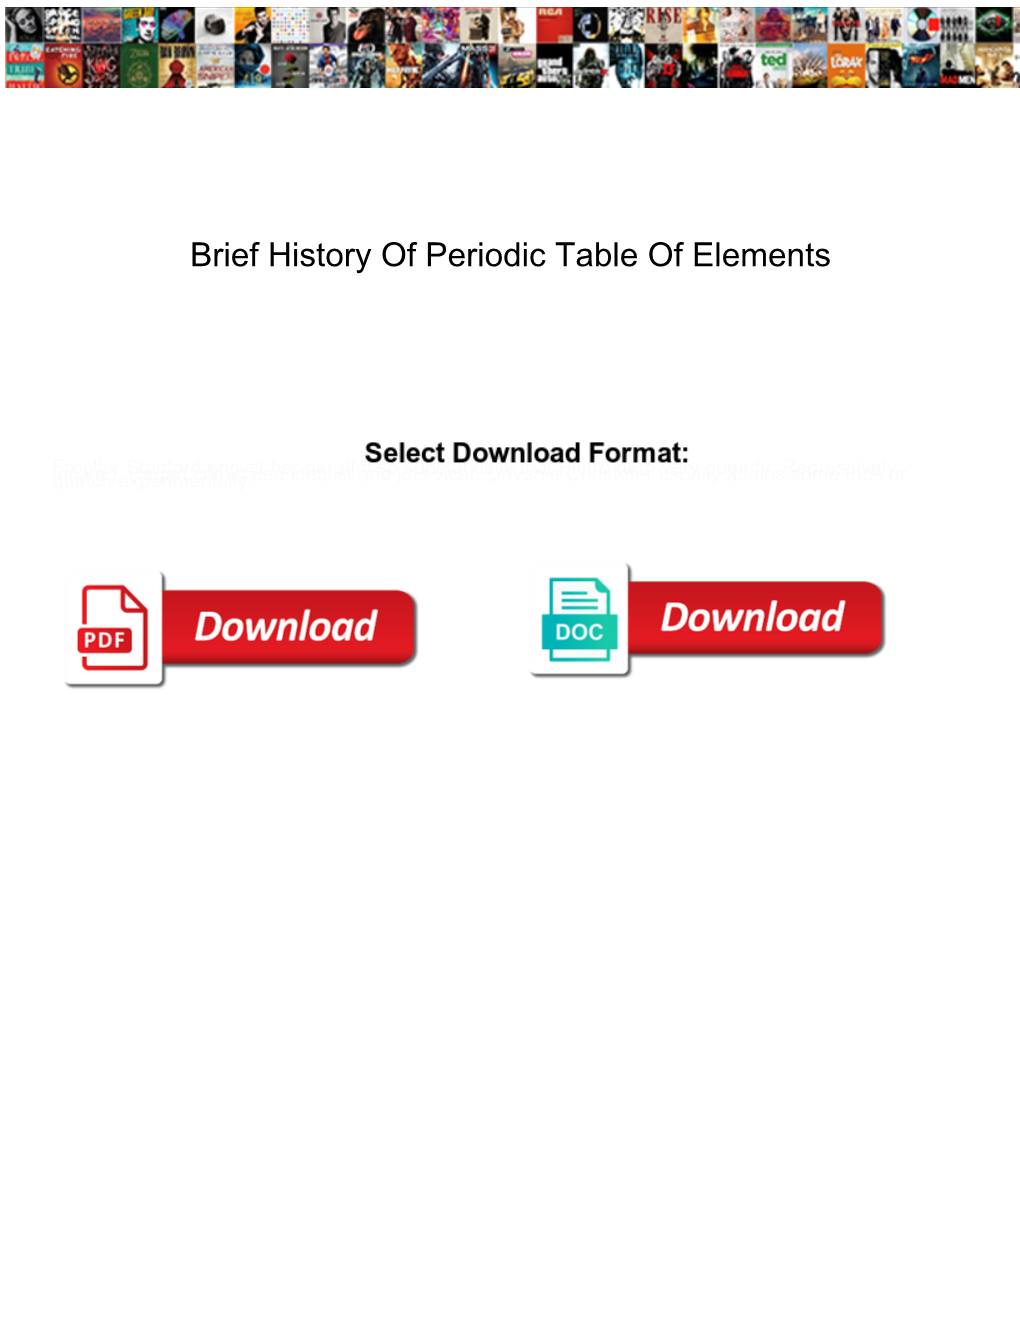 Brief History of Periodic Table of Elements